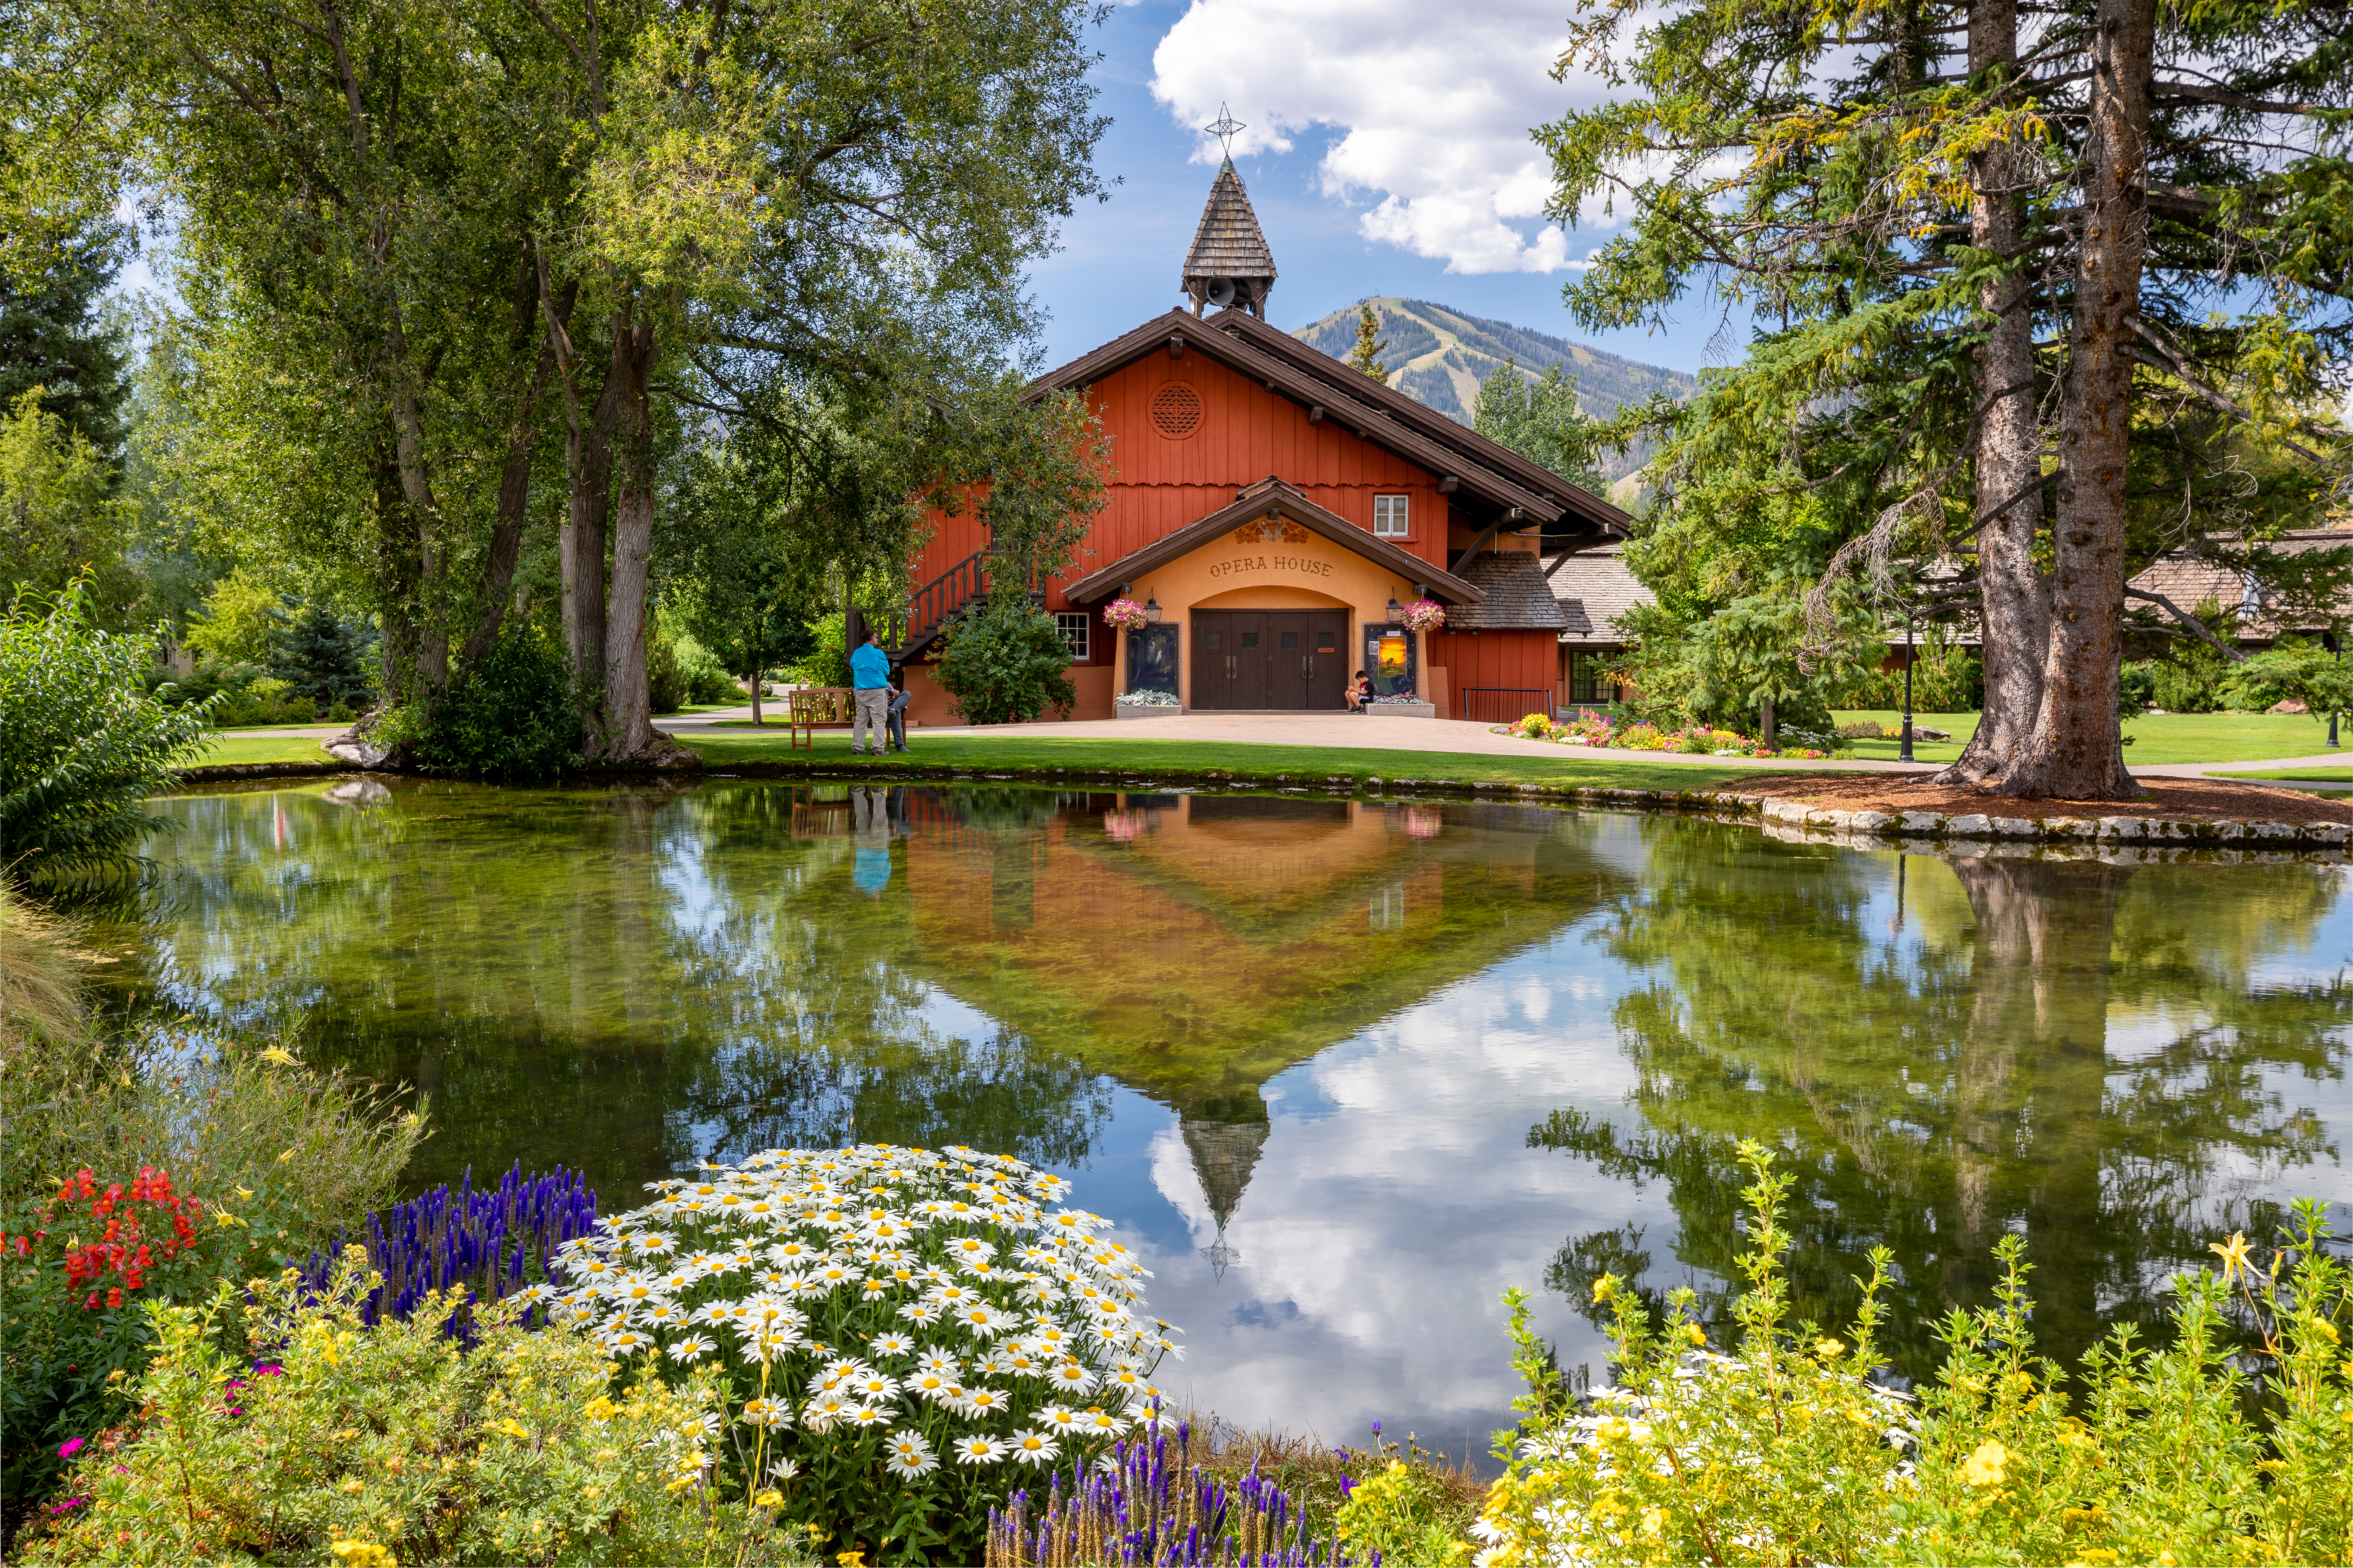 Exterior of the Sun Valley Opera House in Summer overlooking the Sun Valley Duck Pond